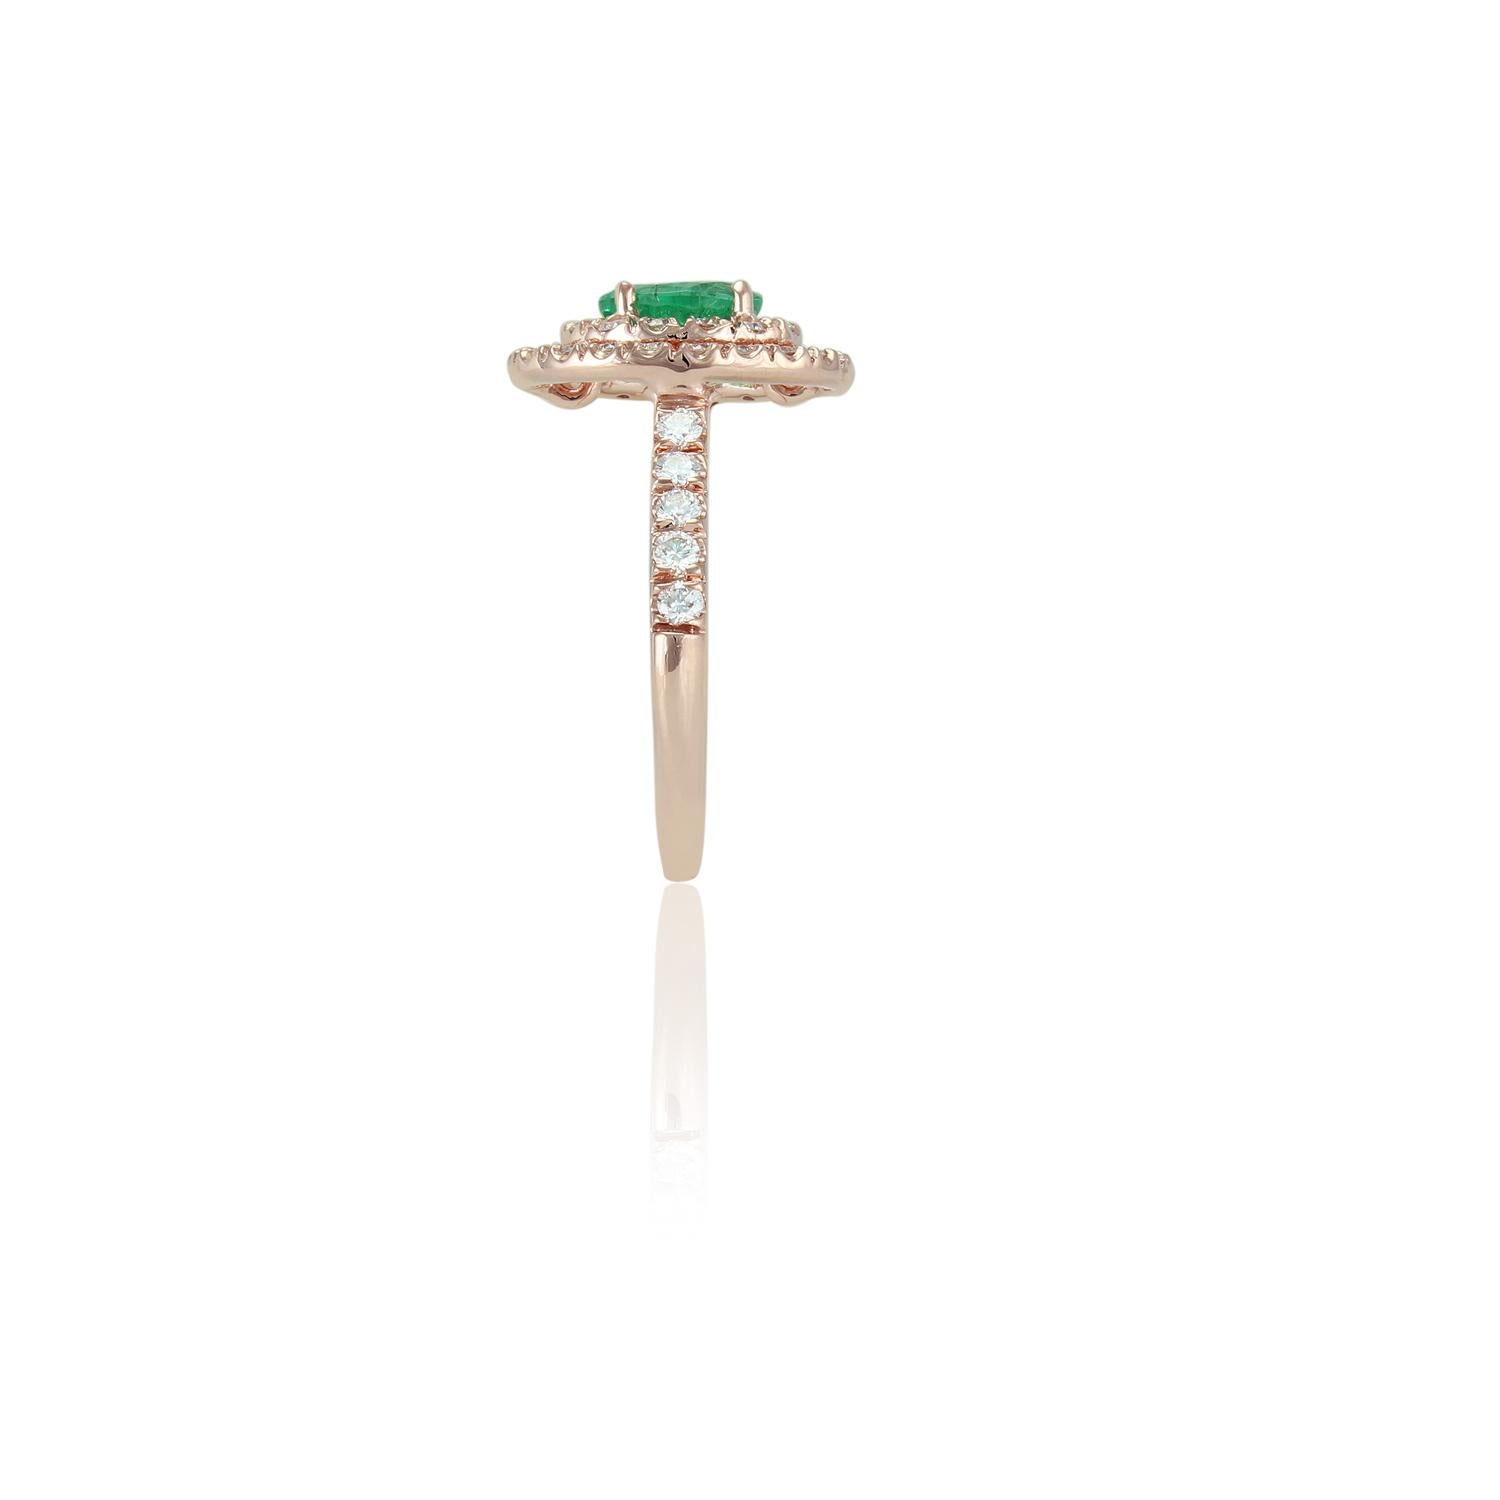 Contemporary 0.88 Carat Clear Zambian Emerald & Diamond Cluster Ring in 18K Yellow Gold For Sale